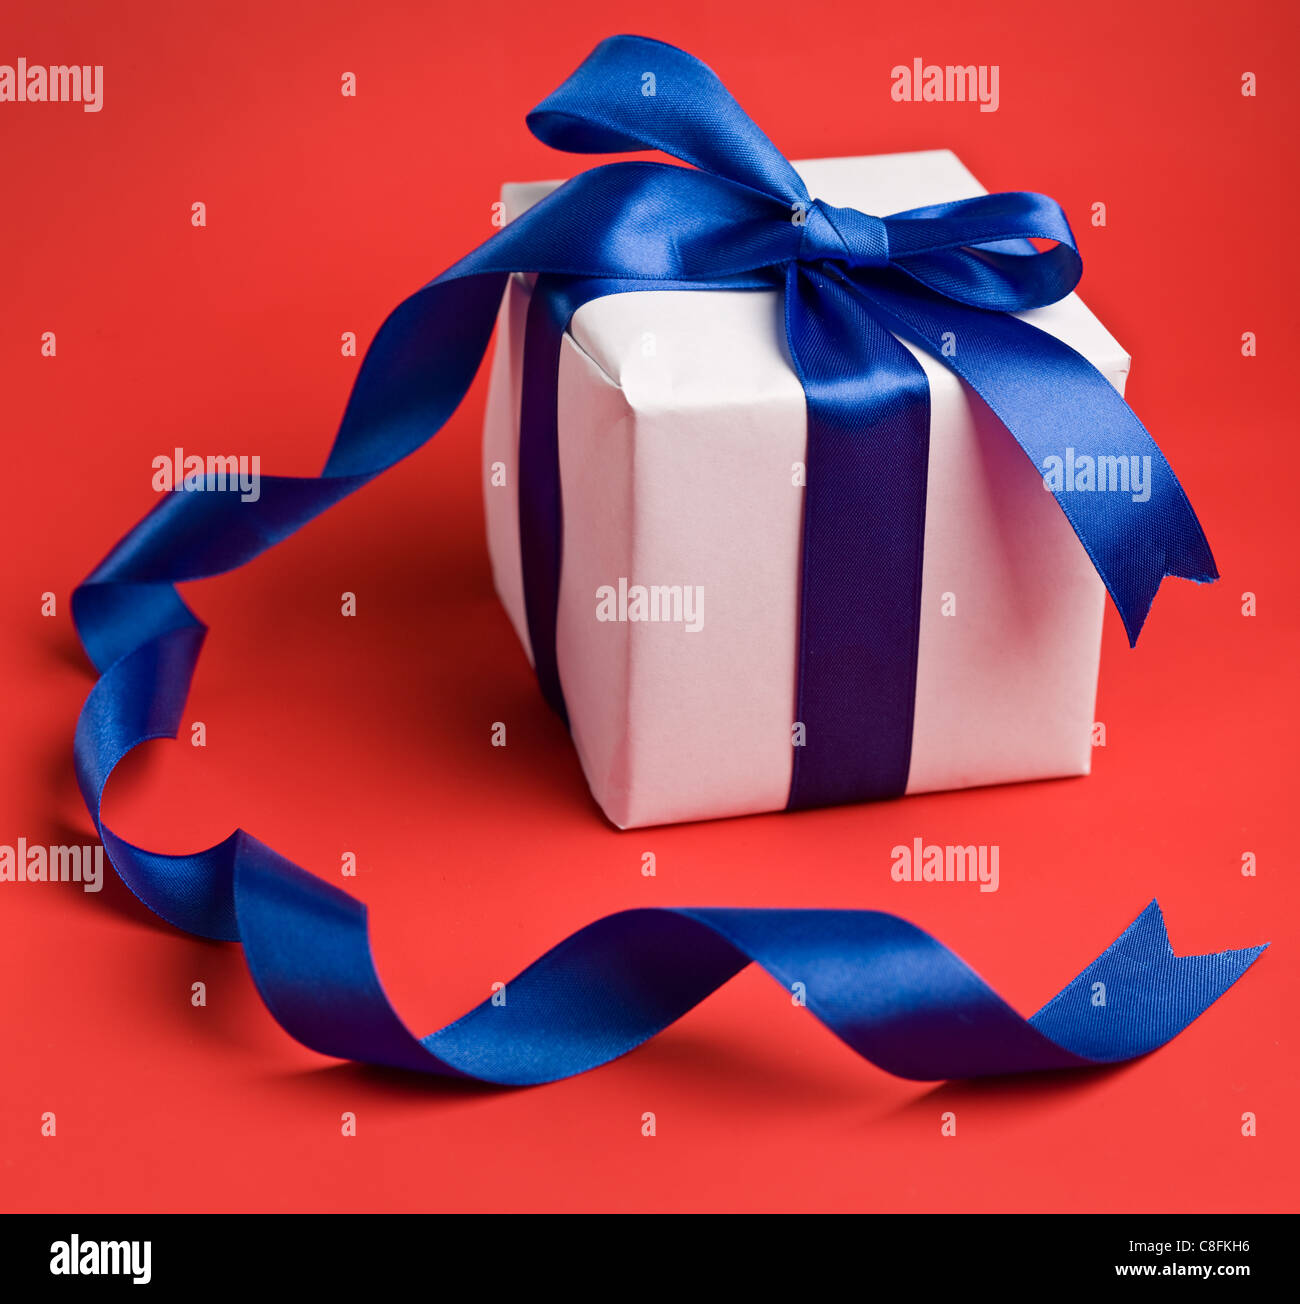 Gift box with a red background. Stock Photo